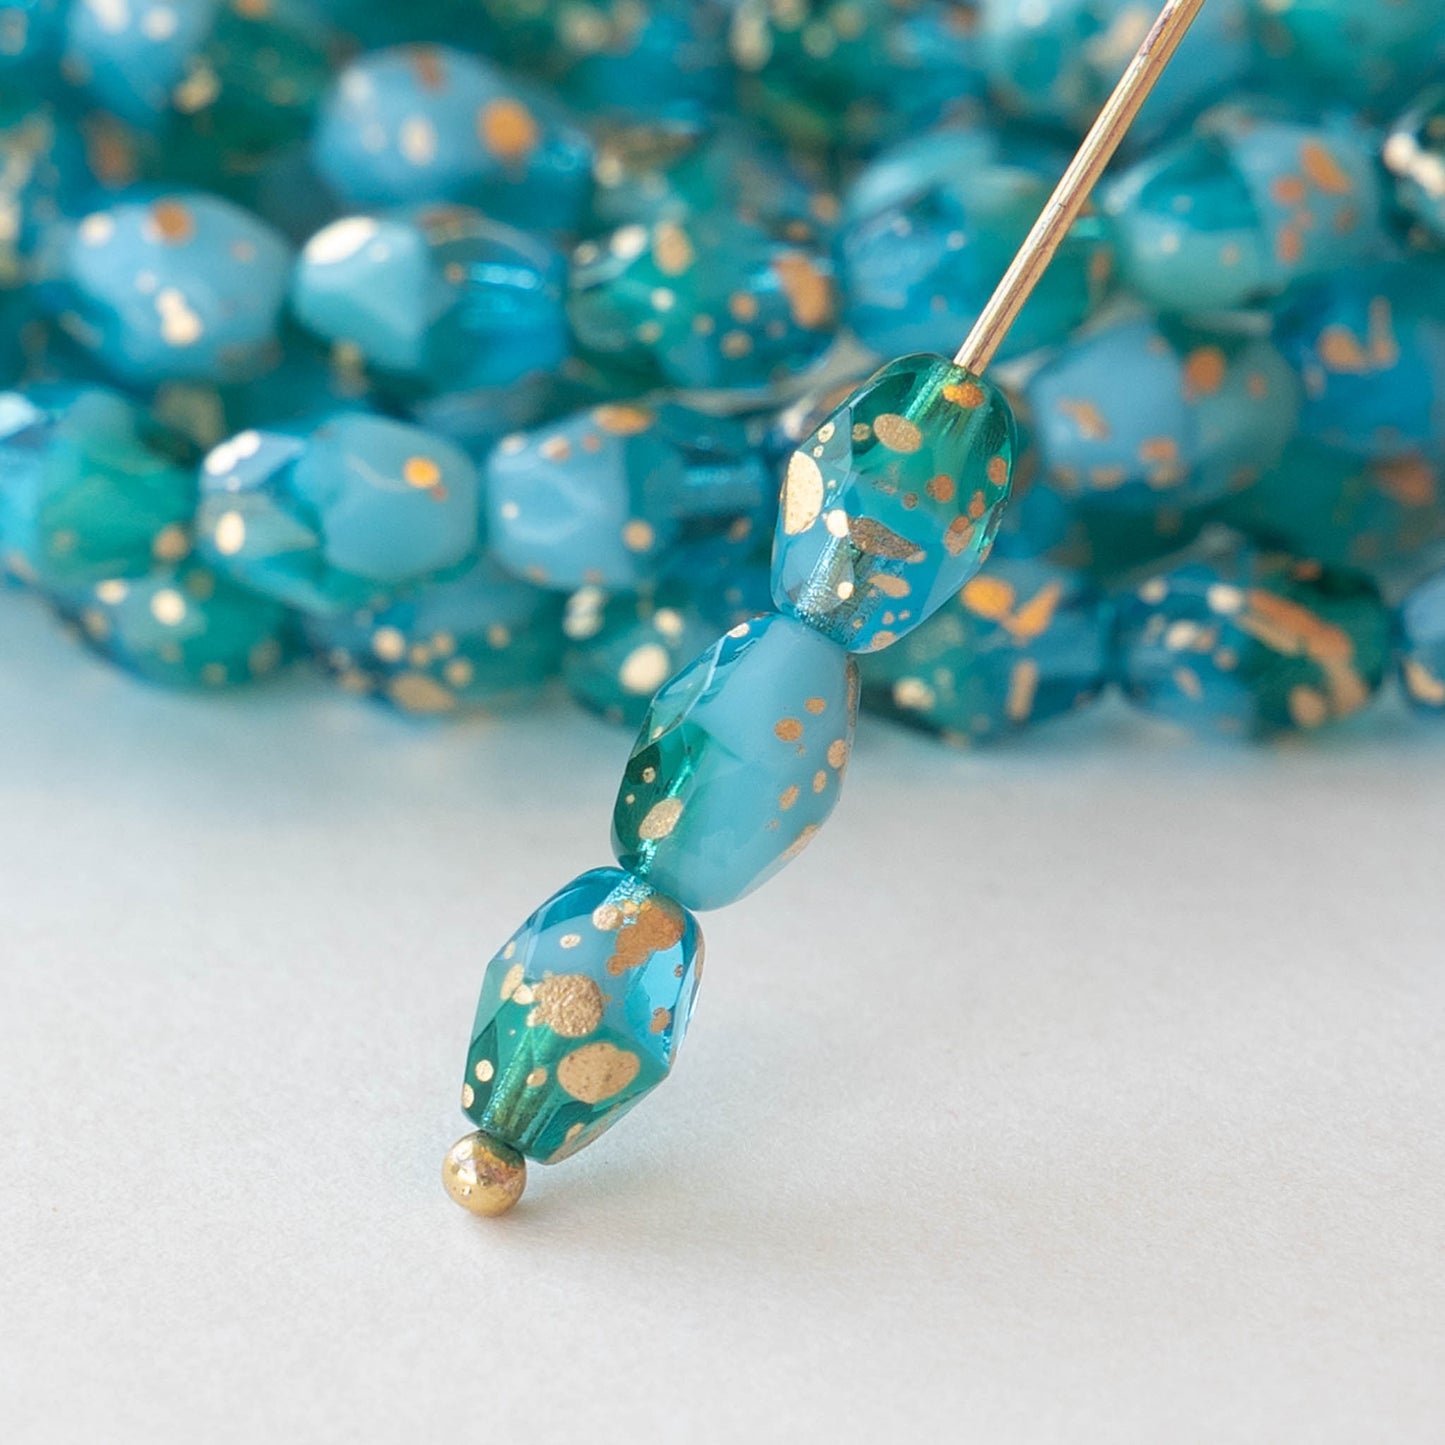 5x7mm Oval Beads - Aqua and Teal with Gold Dust - 20 beads